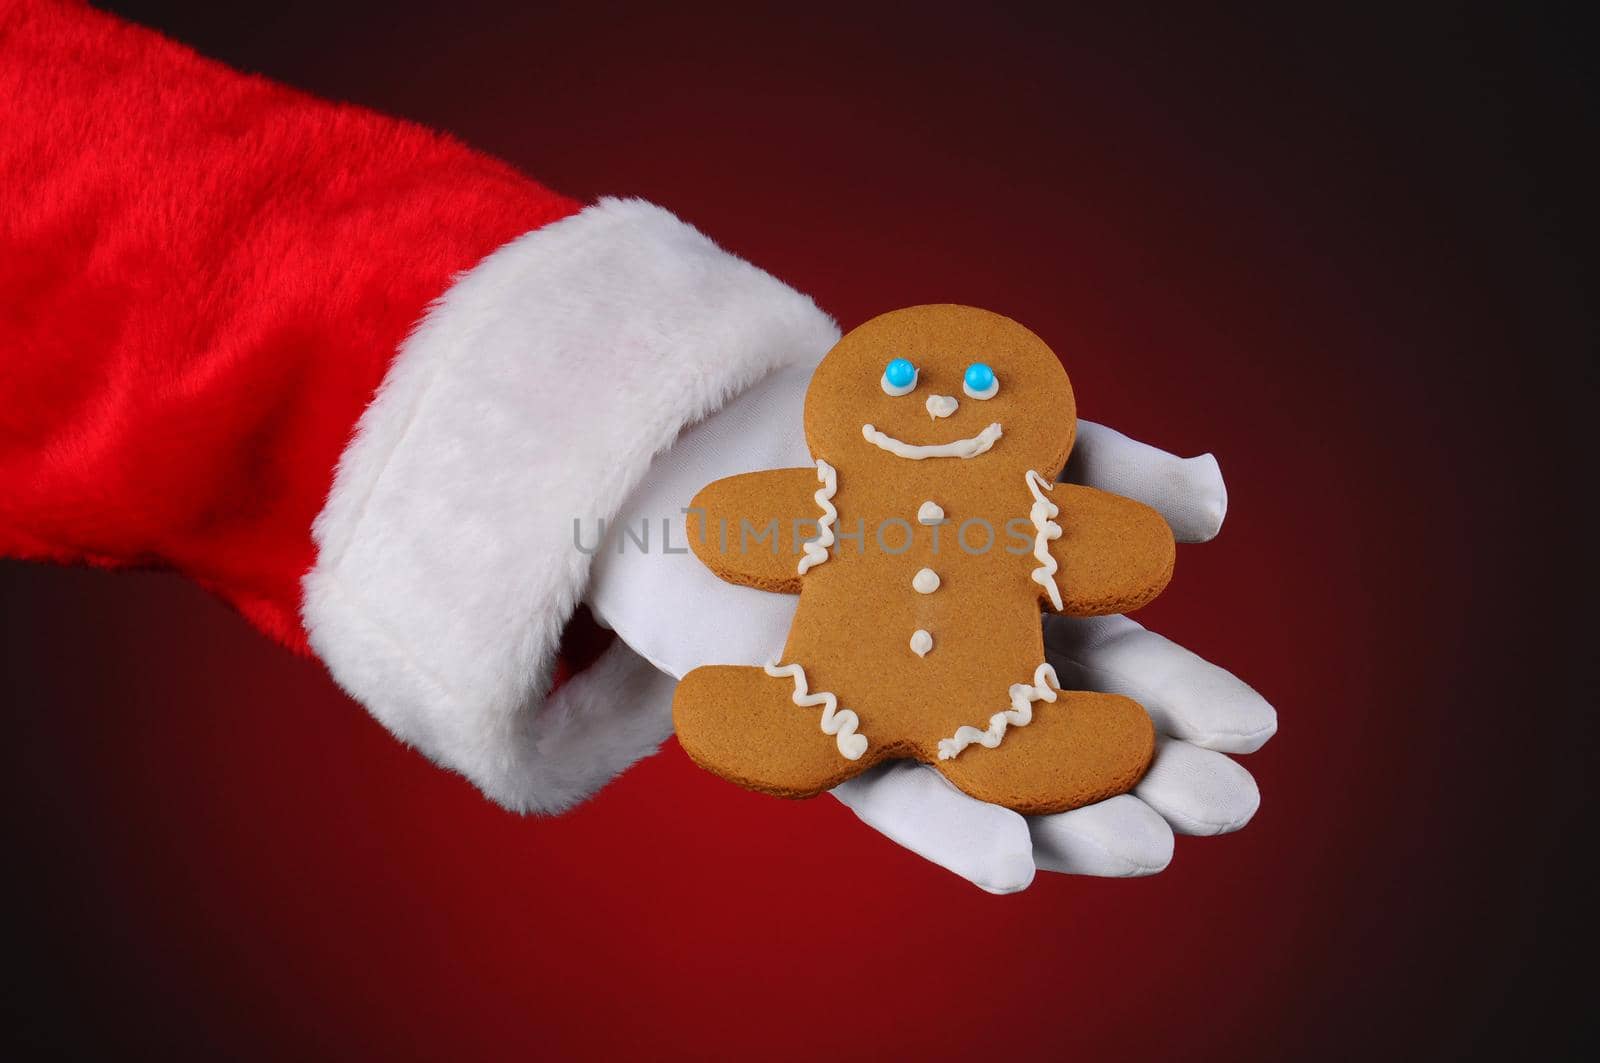 Santa Claus holding a Gingerbread man cookie in the palm of his hand. Horizontal format over a light to dark red background, showing only hand and arm.